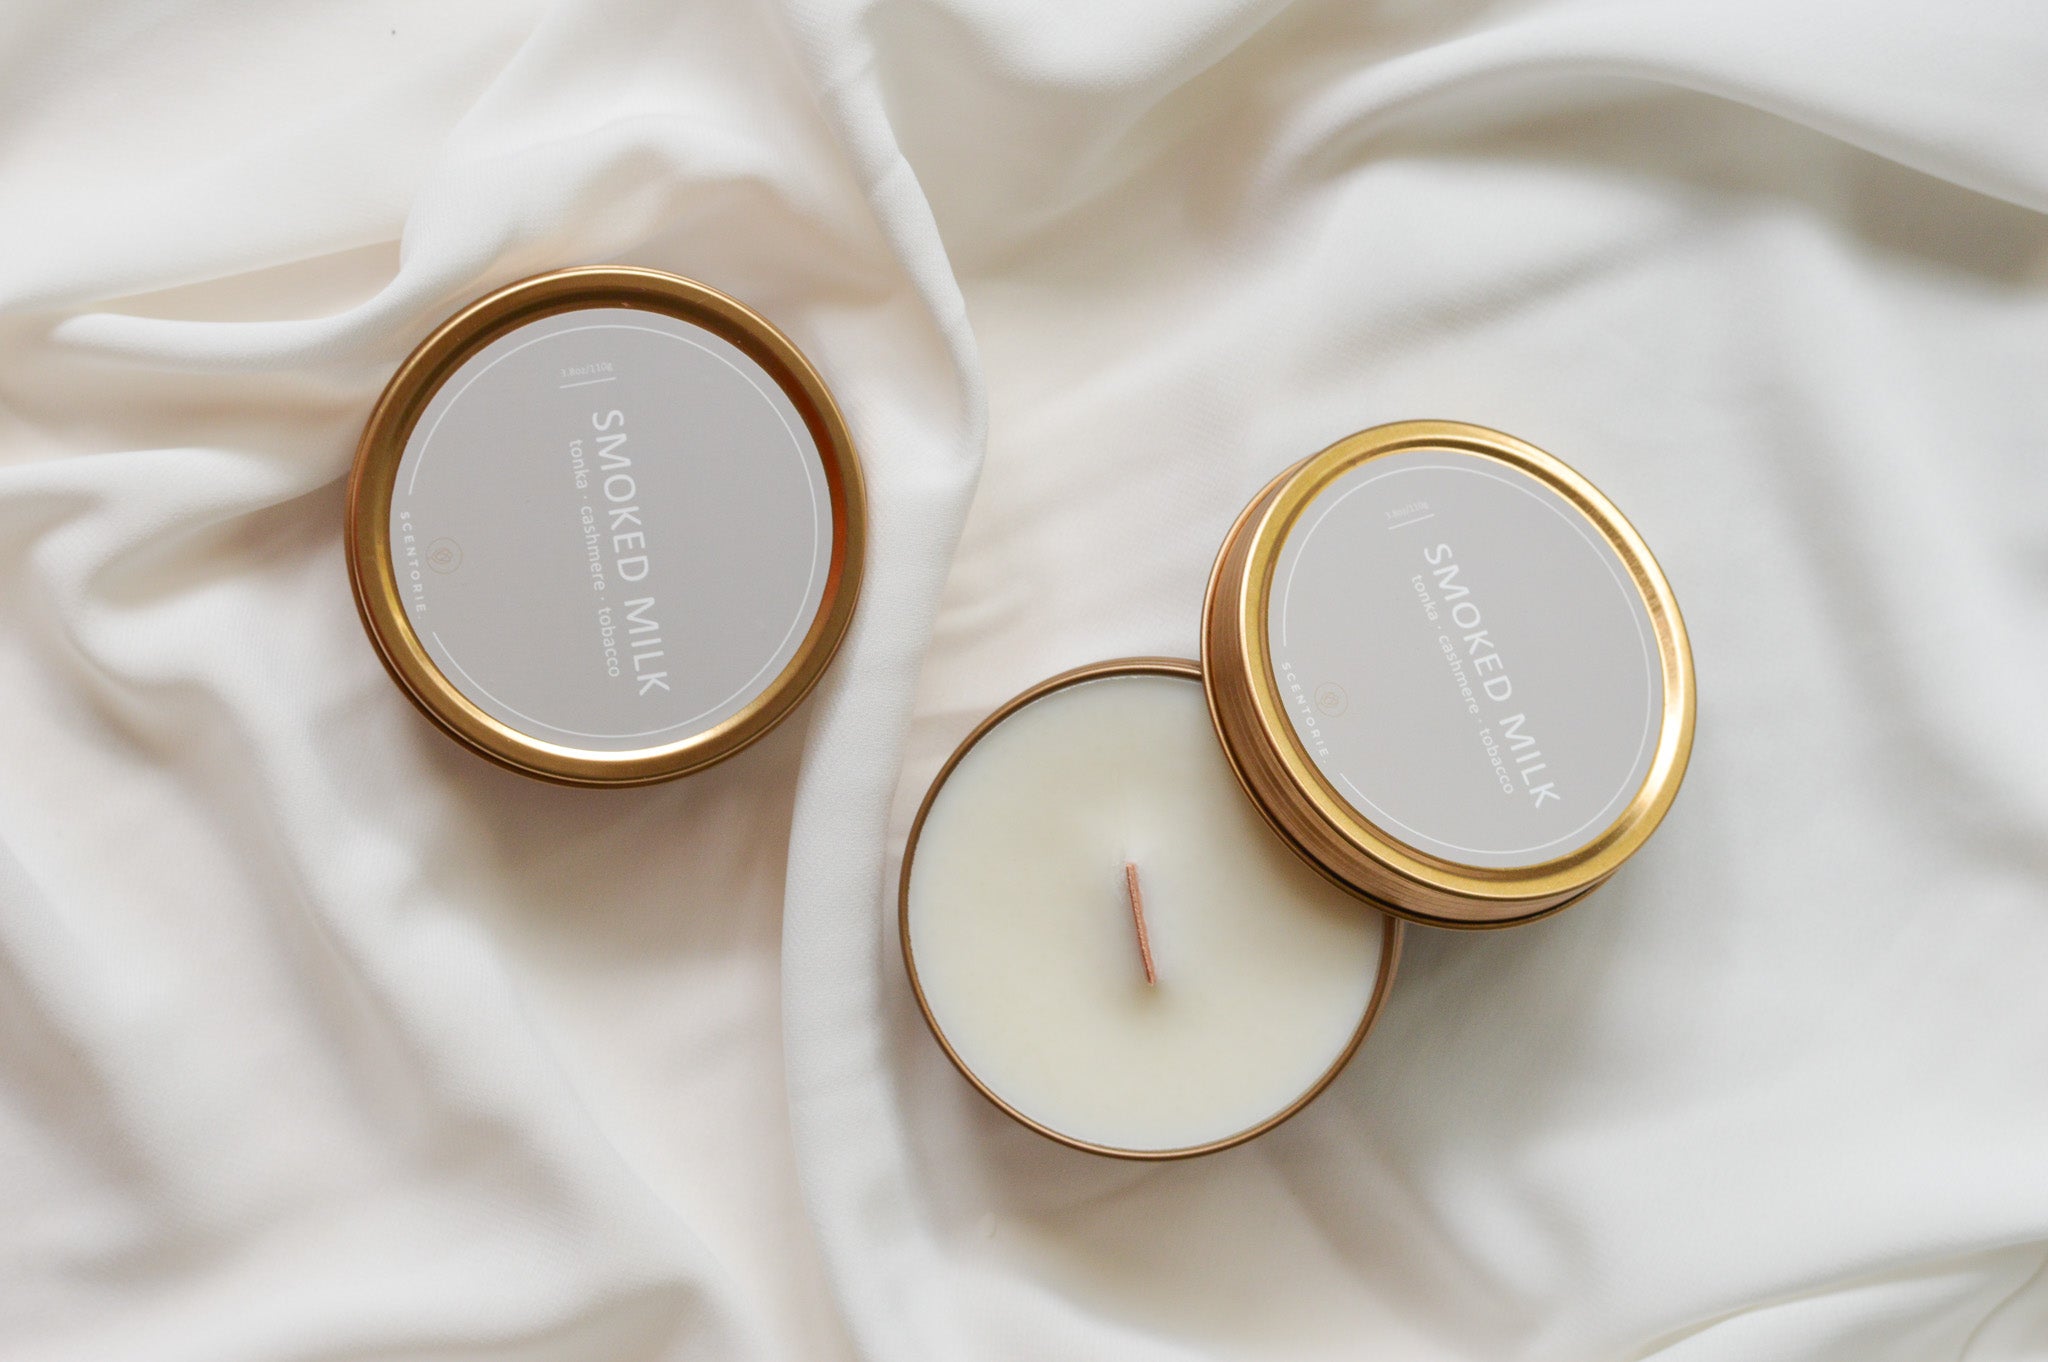 TRAVEL CANDLES